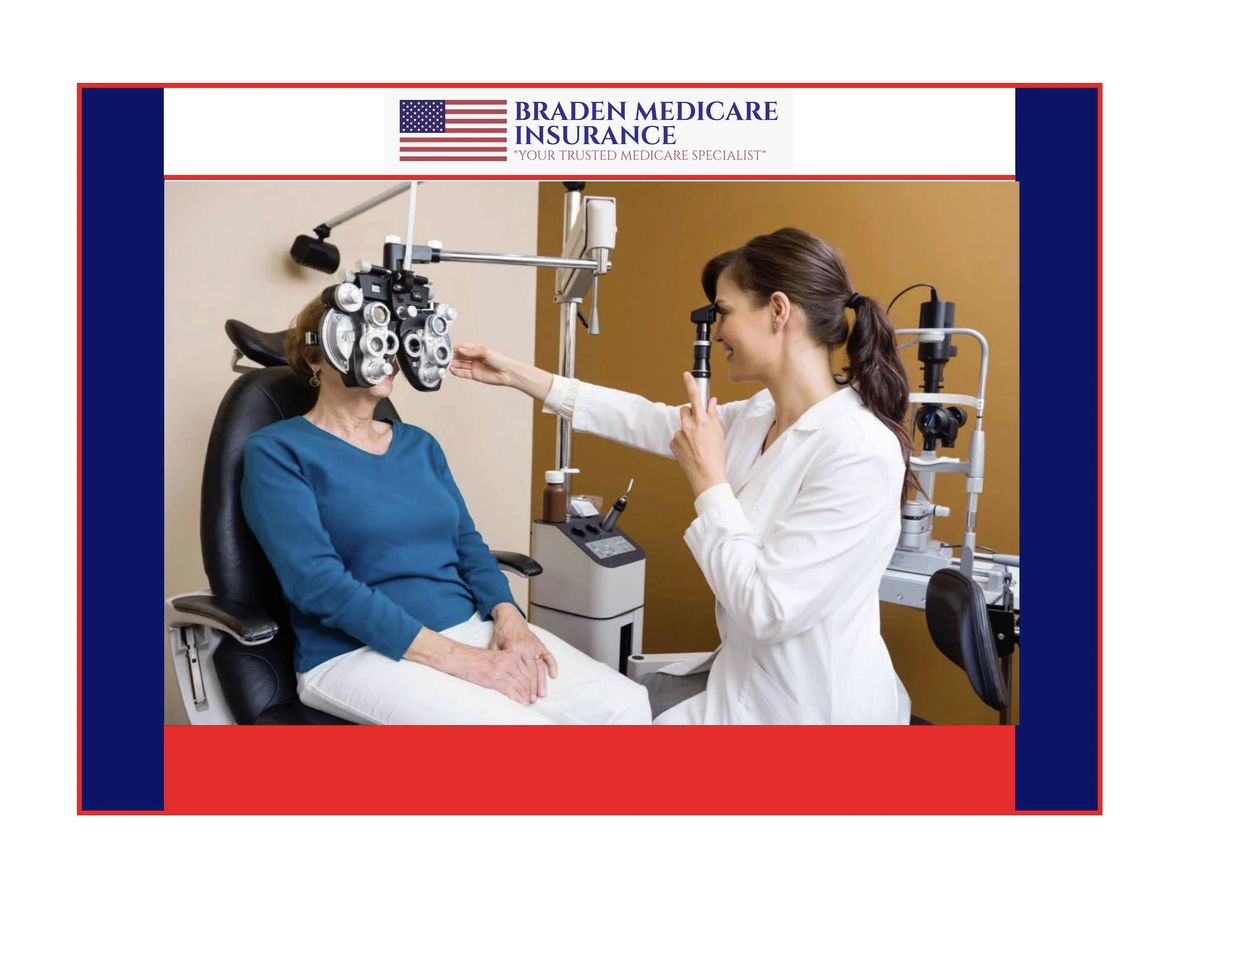 Vision Insurance Is Available At Braden Medicare Insurance Services